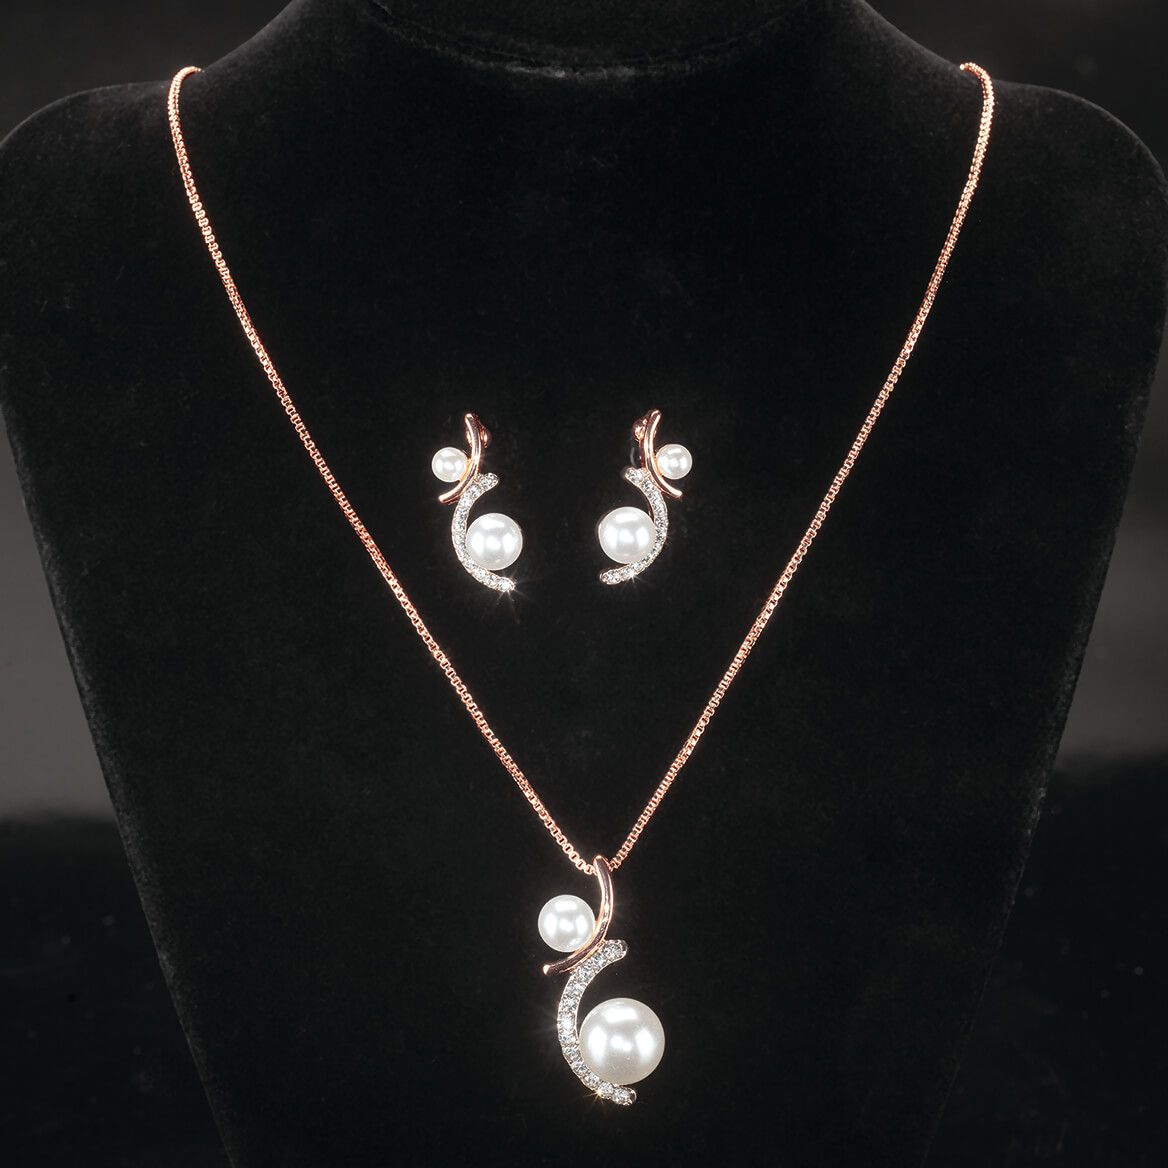 Double Pearl Necklace and Earring Set + '-' + 374253